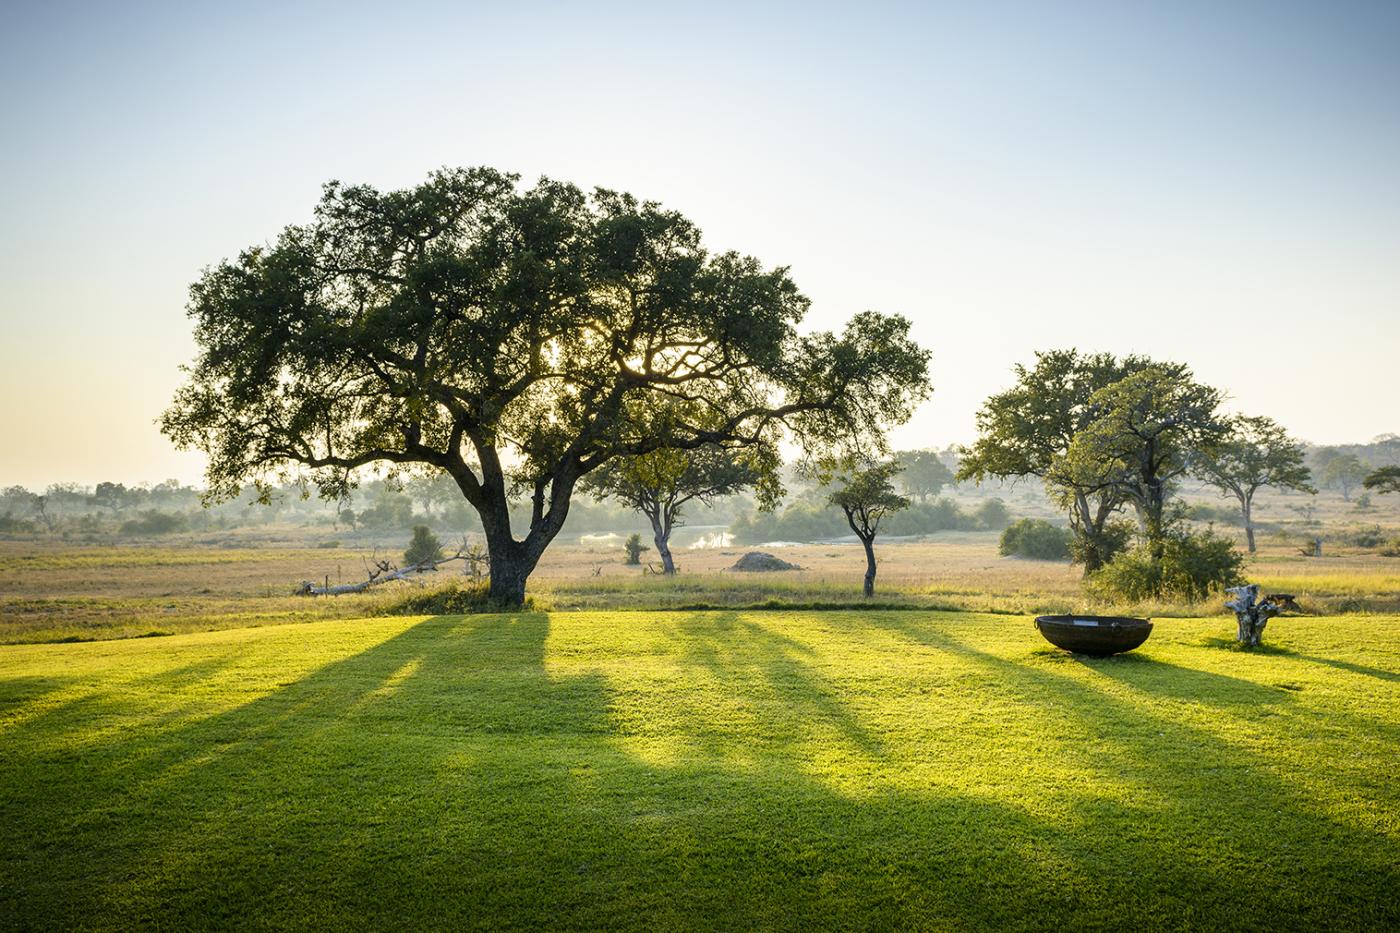 With stunning views of the South African landscape, Singita Castleton will leave you speechless.